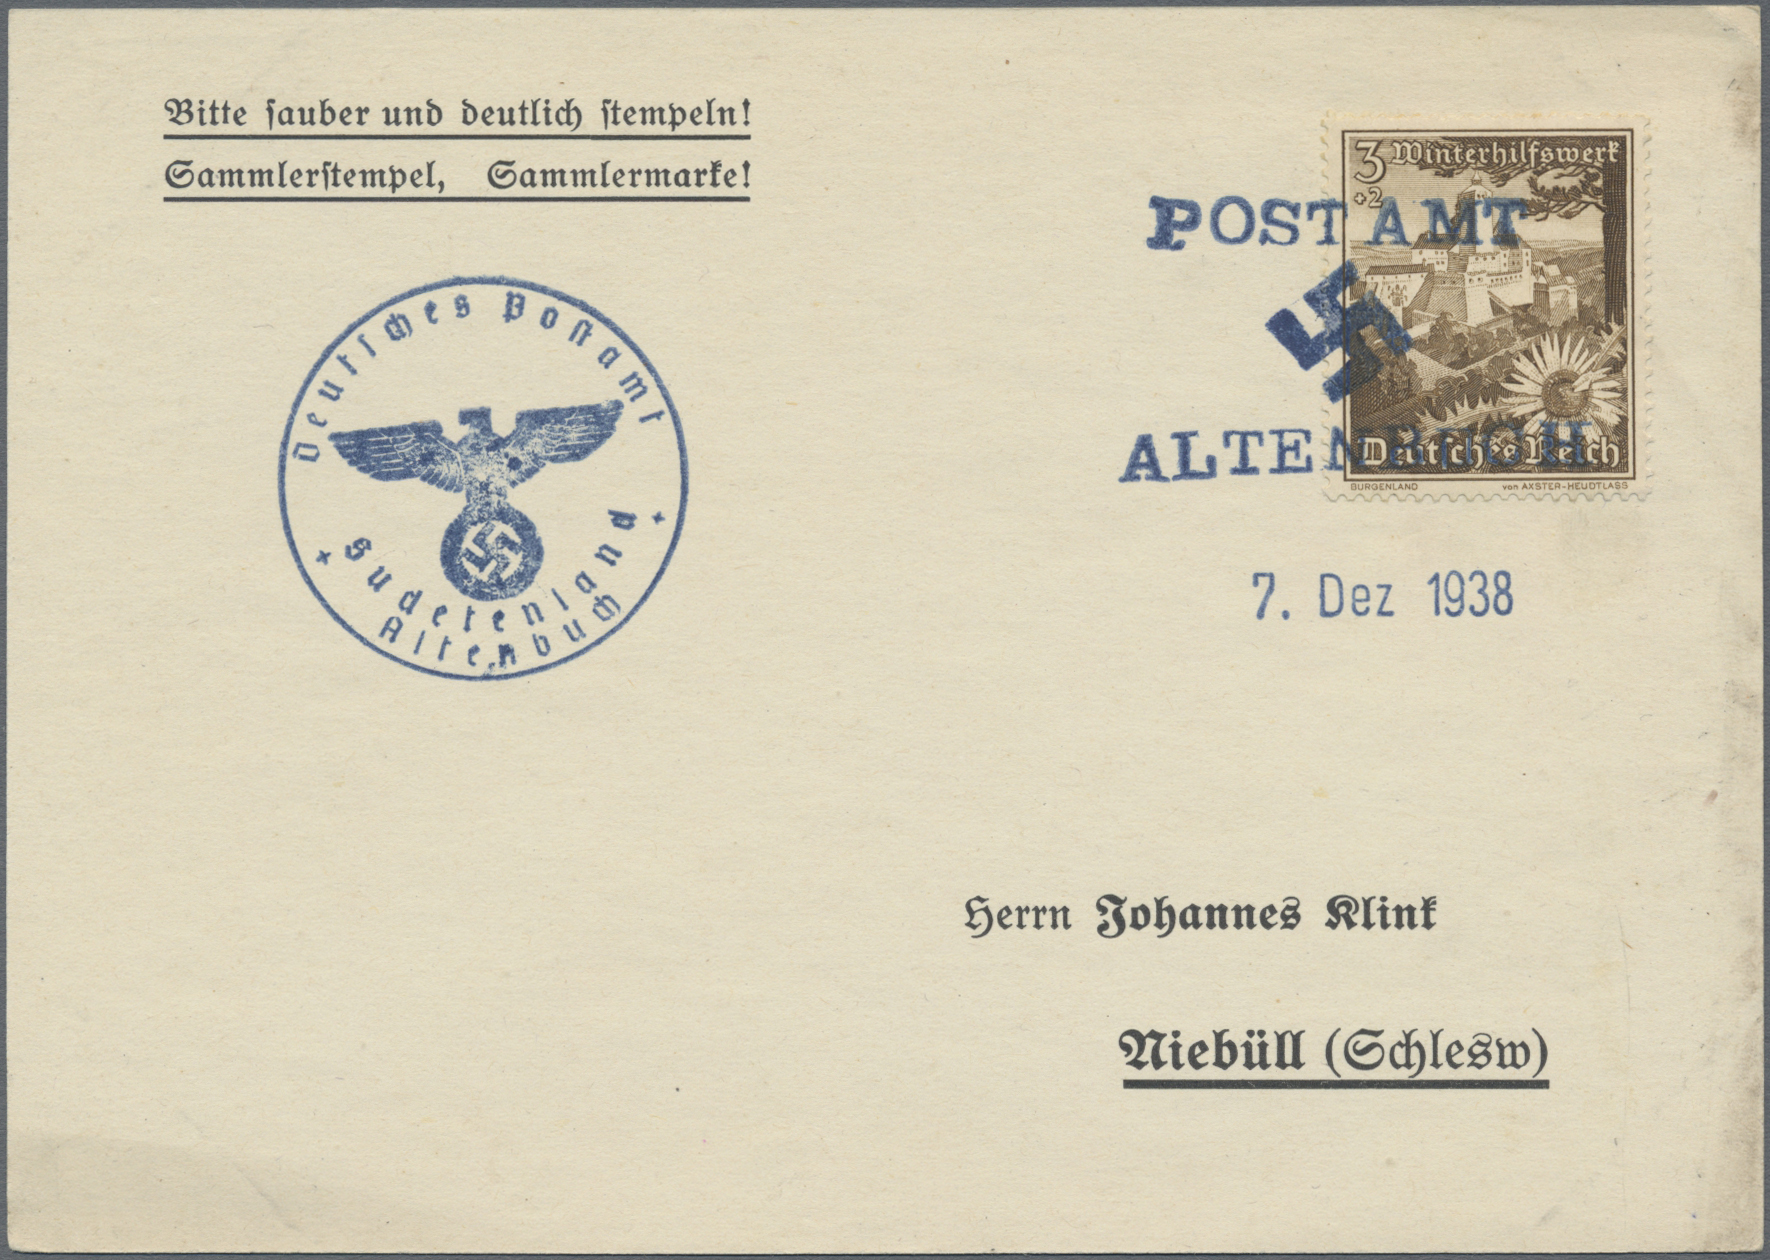 Lot 11378 - sudetenland  -  Auktionshaus Christoph Gärtner GmbH & Co. KG 55th AUCTION - Day 5